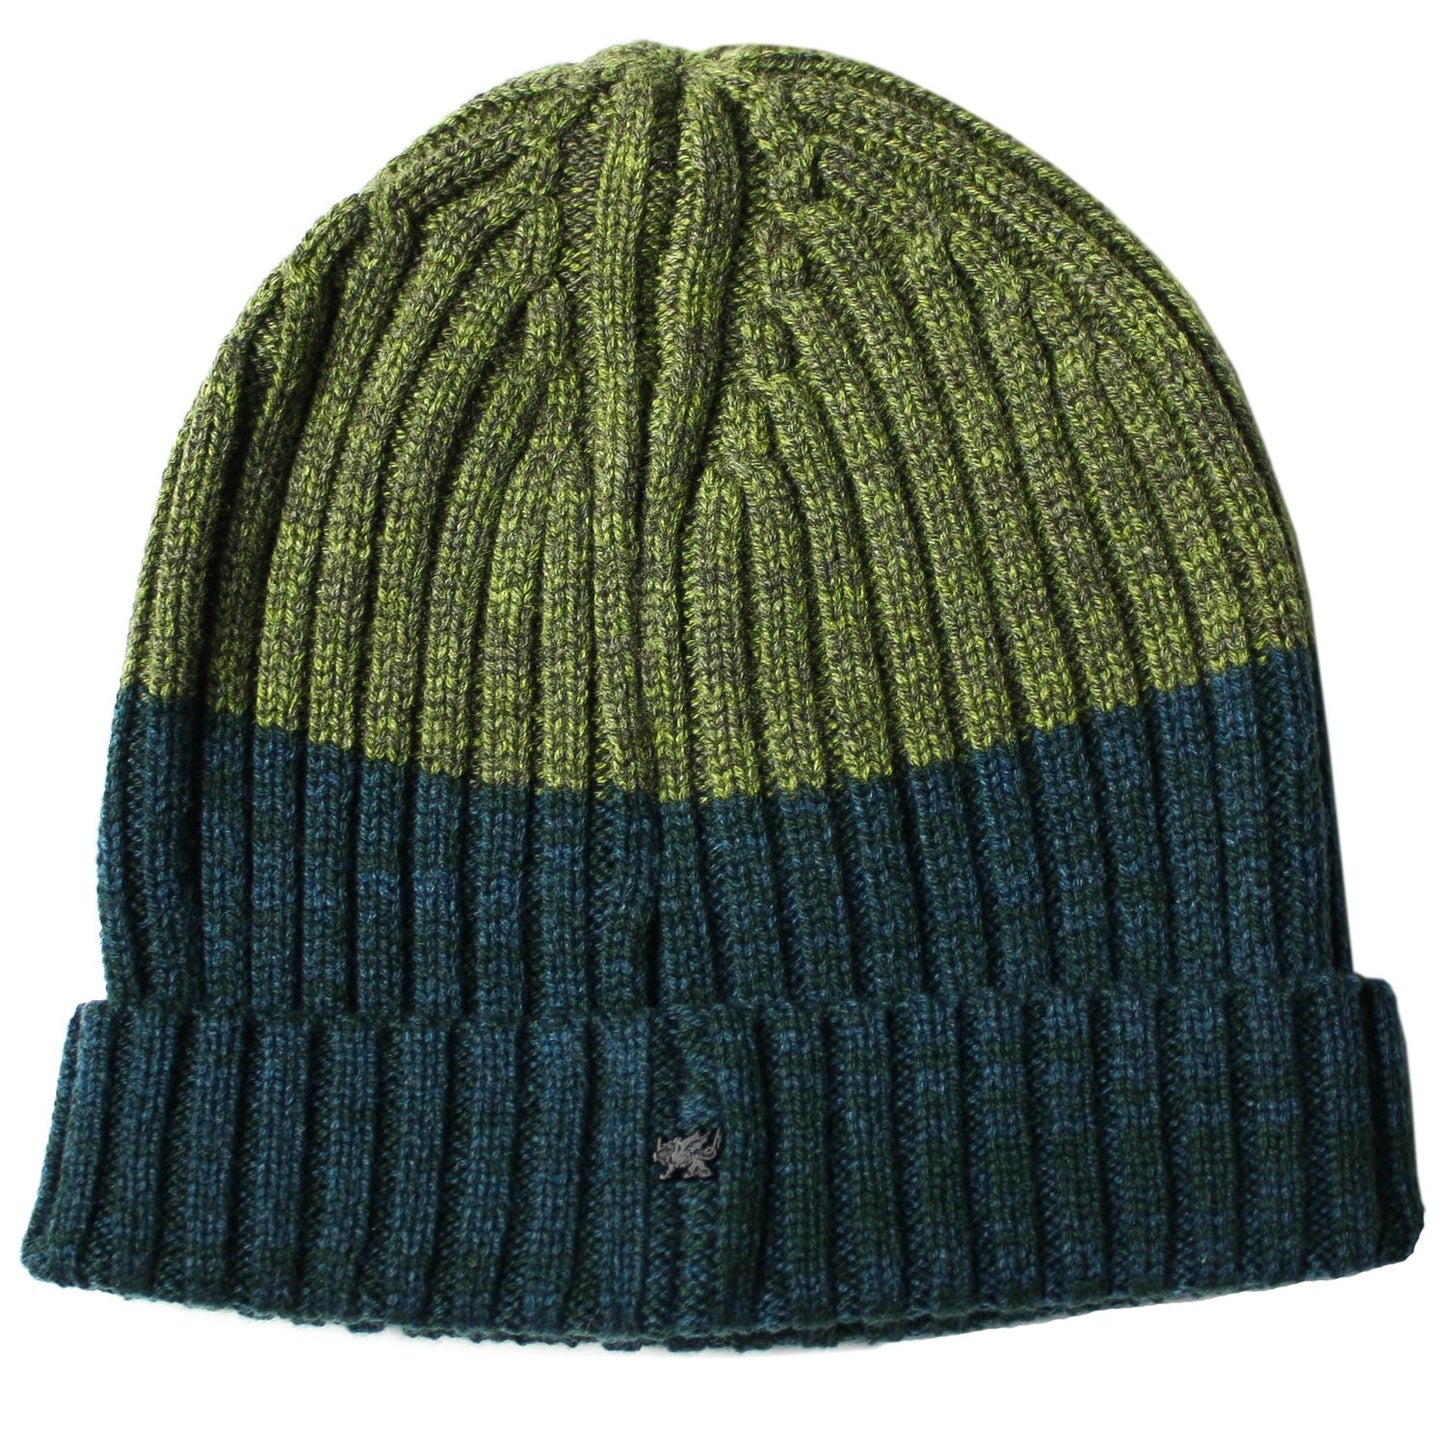 Benny Beanie in Olive/Hunter - Lords Of Harlech